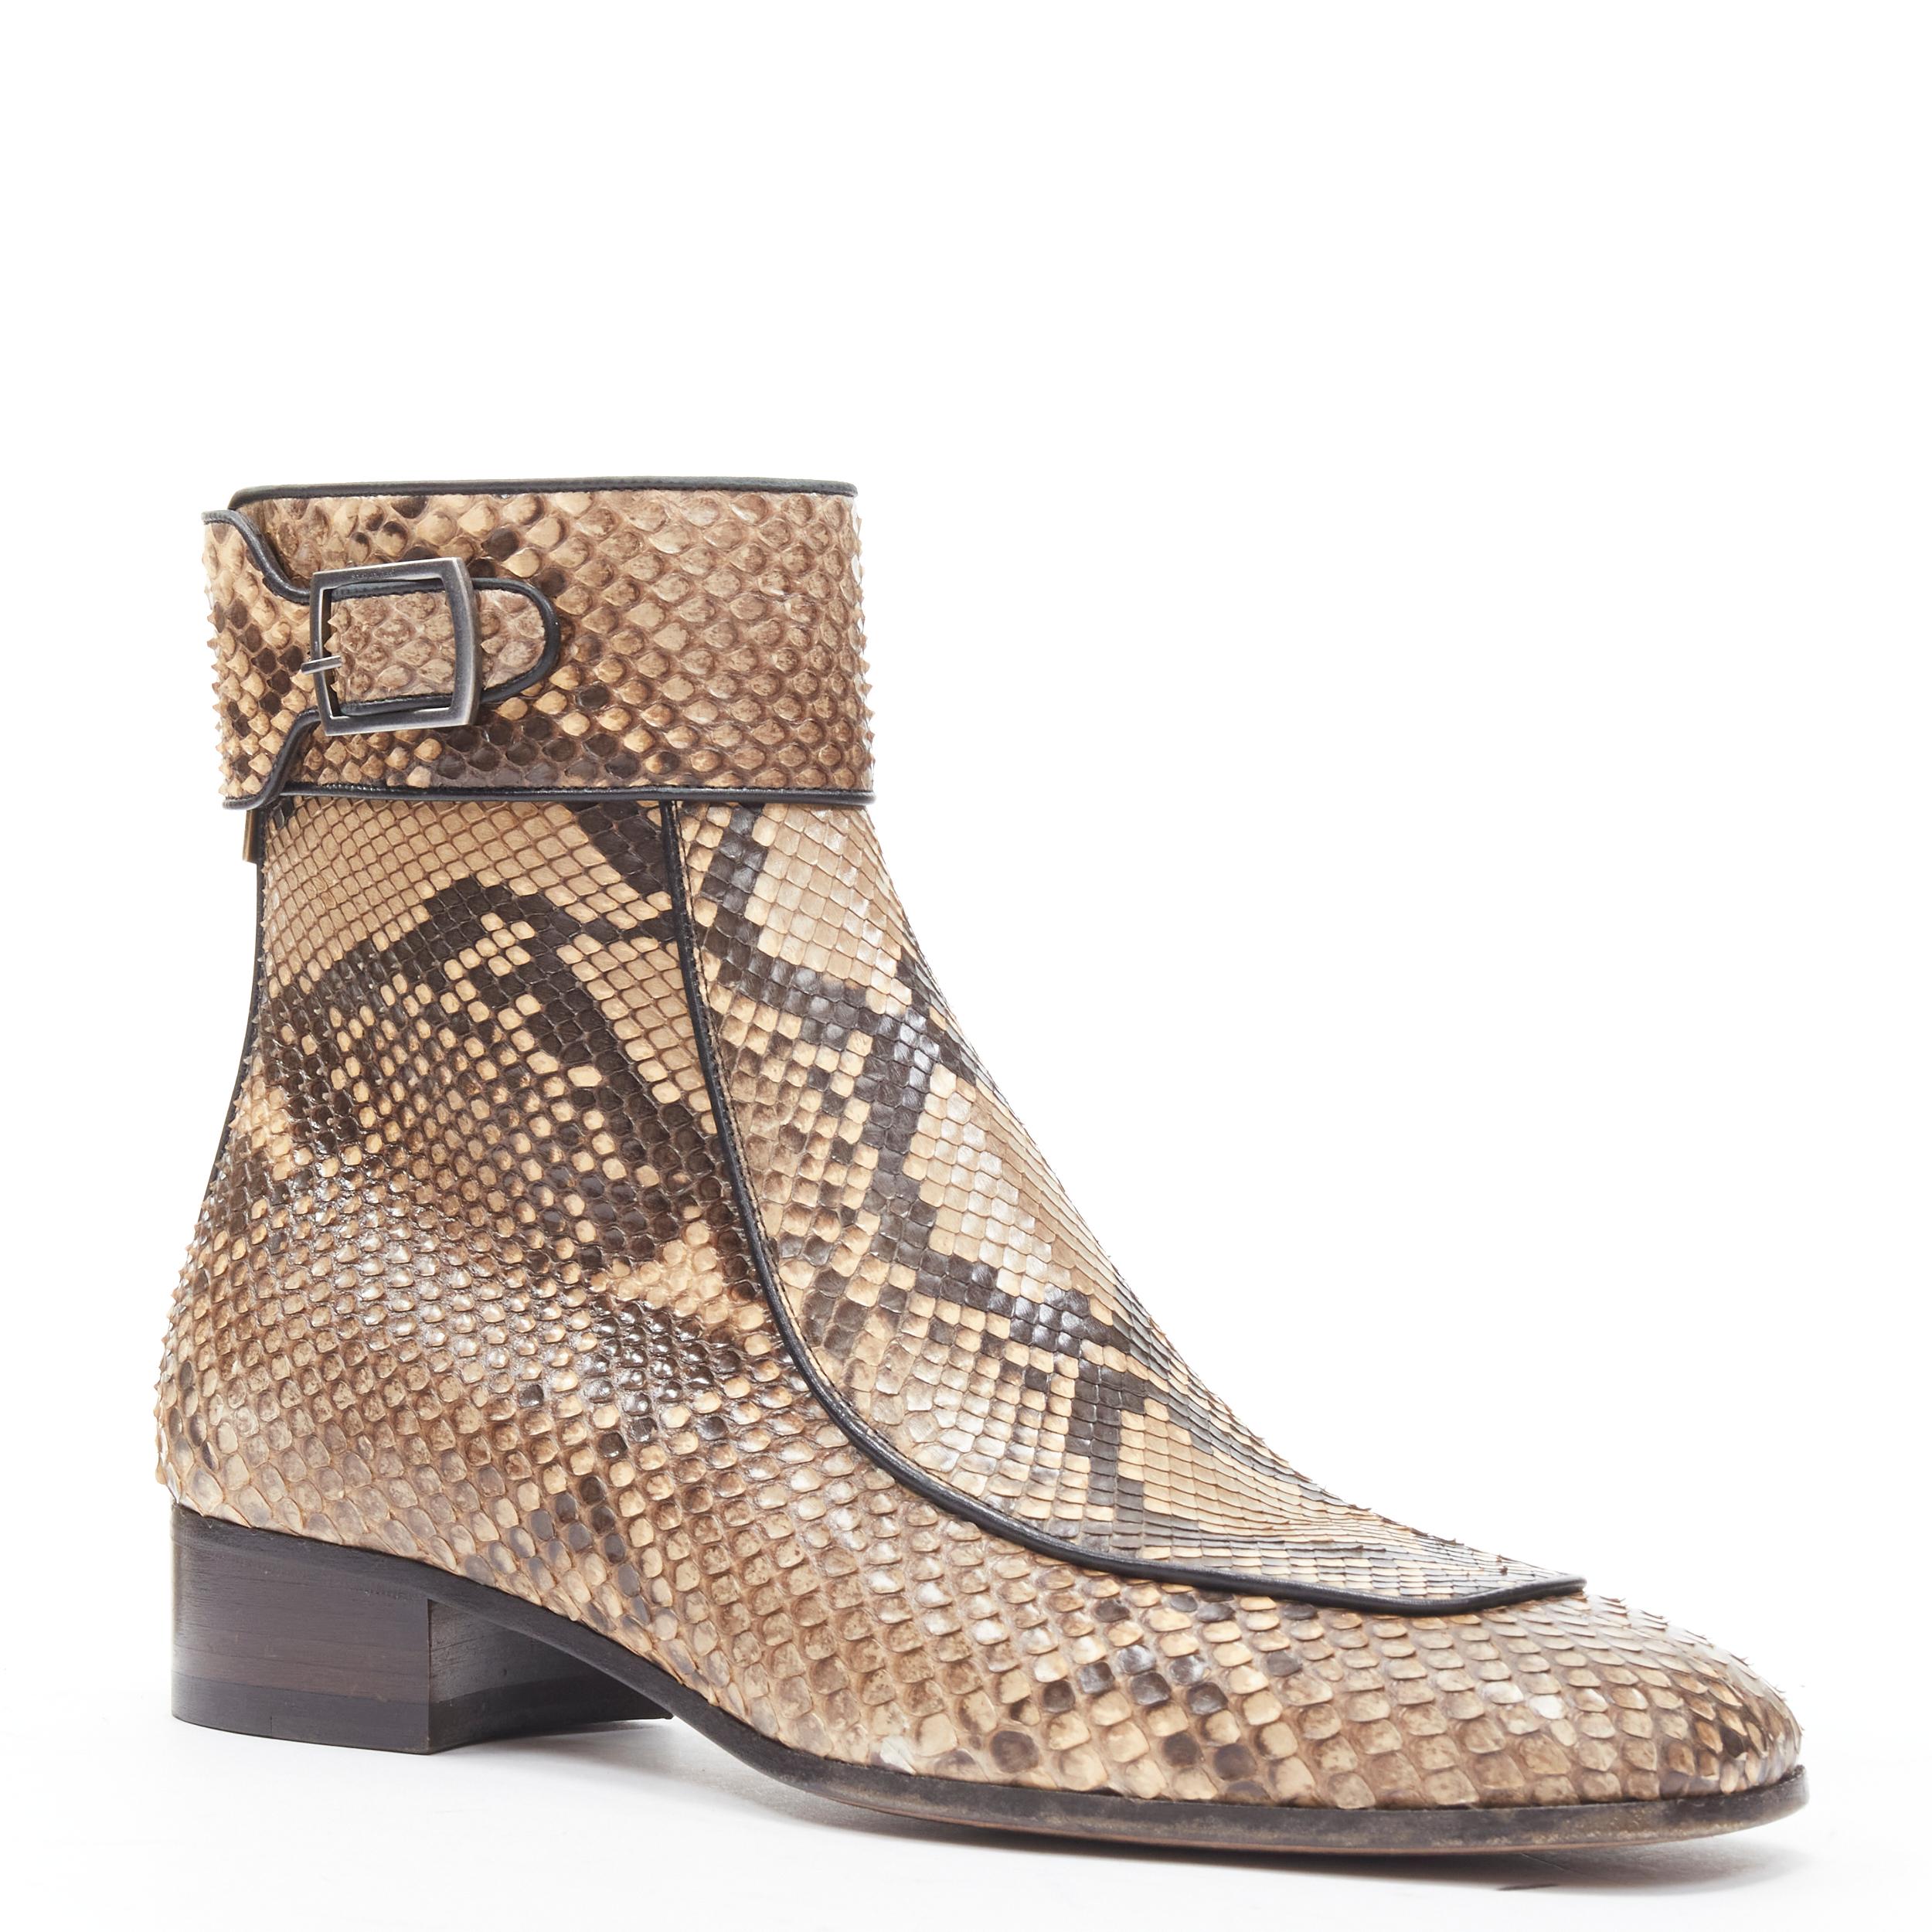 new SAINT LAURENT Miles 30 Zip python snake square toe buckle boot EU41 
Reference: TGAS/B01791 
Brand: Saint Laurent 
Collection: Fall Winter 2019 Runway 
Material: Snakeskin 
Color: Beige 
Pattern: Solid 
Closure: Zip 
Extra Detail: Intentionally